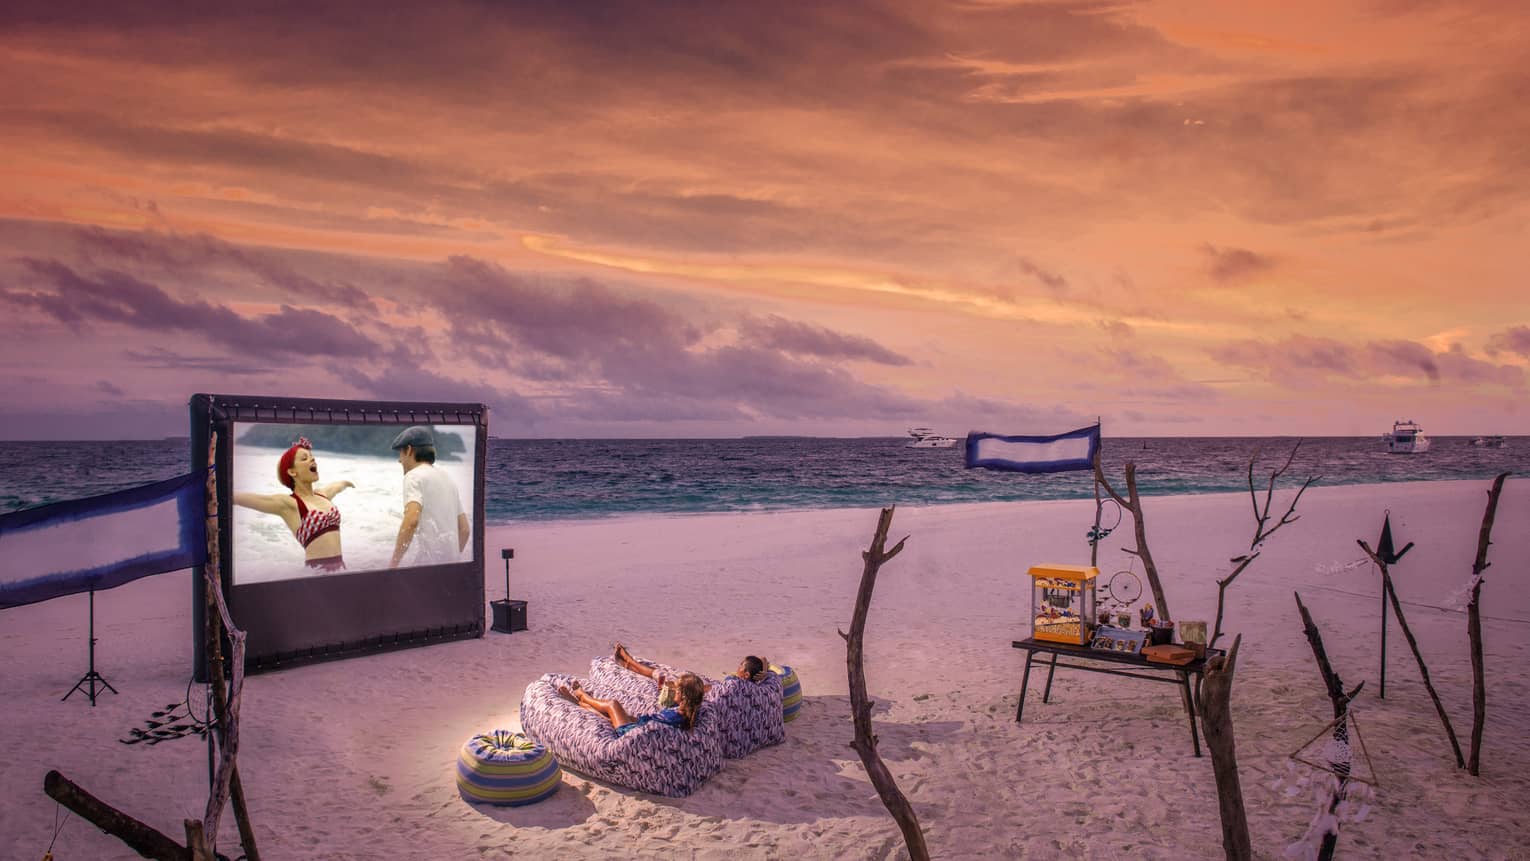 ,Two people in beanbag chairs enjoy a movie night on the beach at dusk, popcorn stand on sand behind them